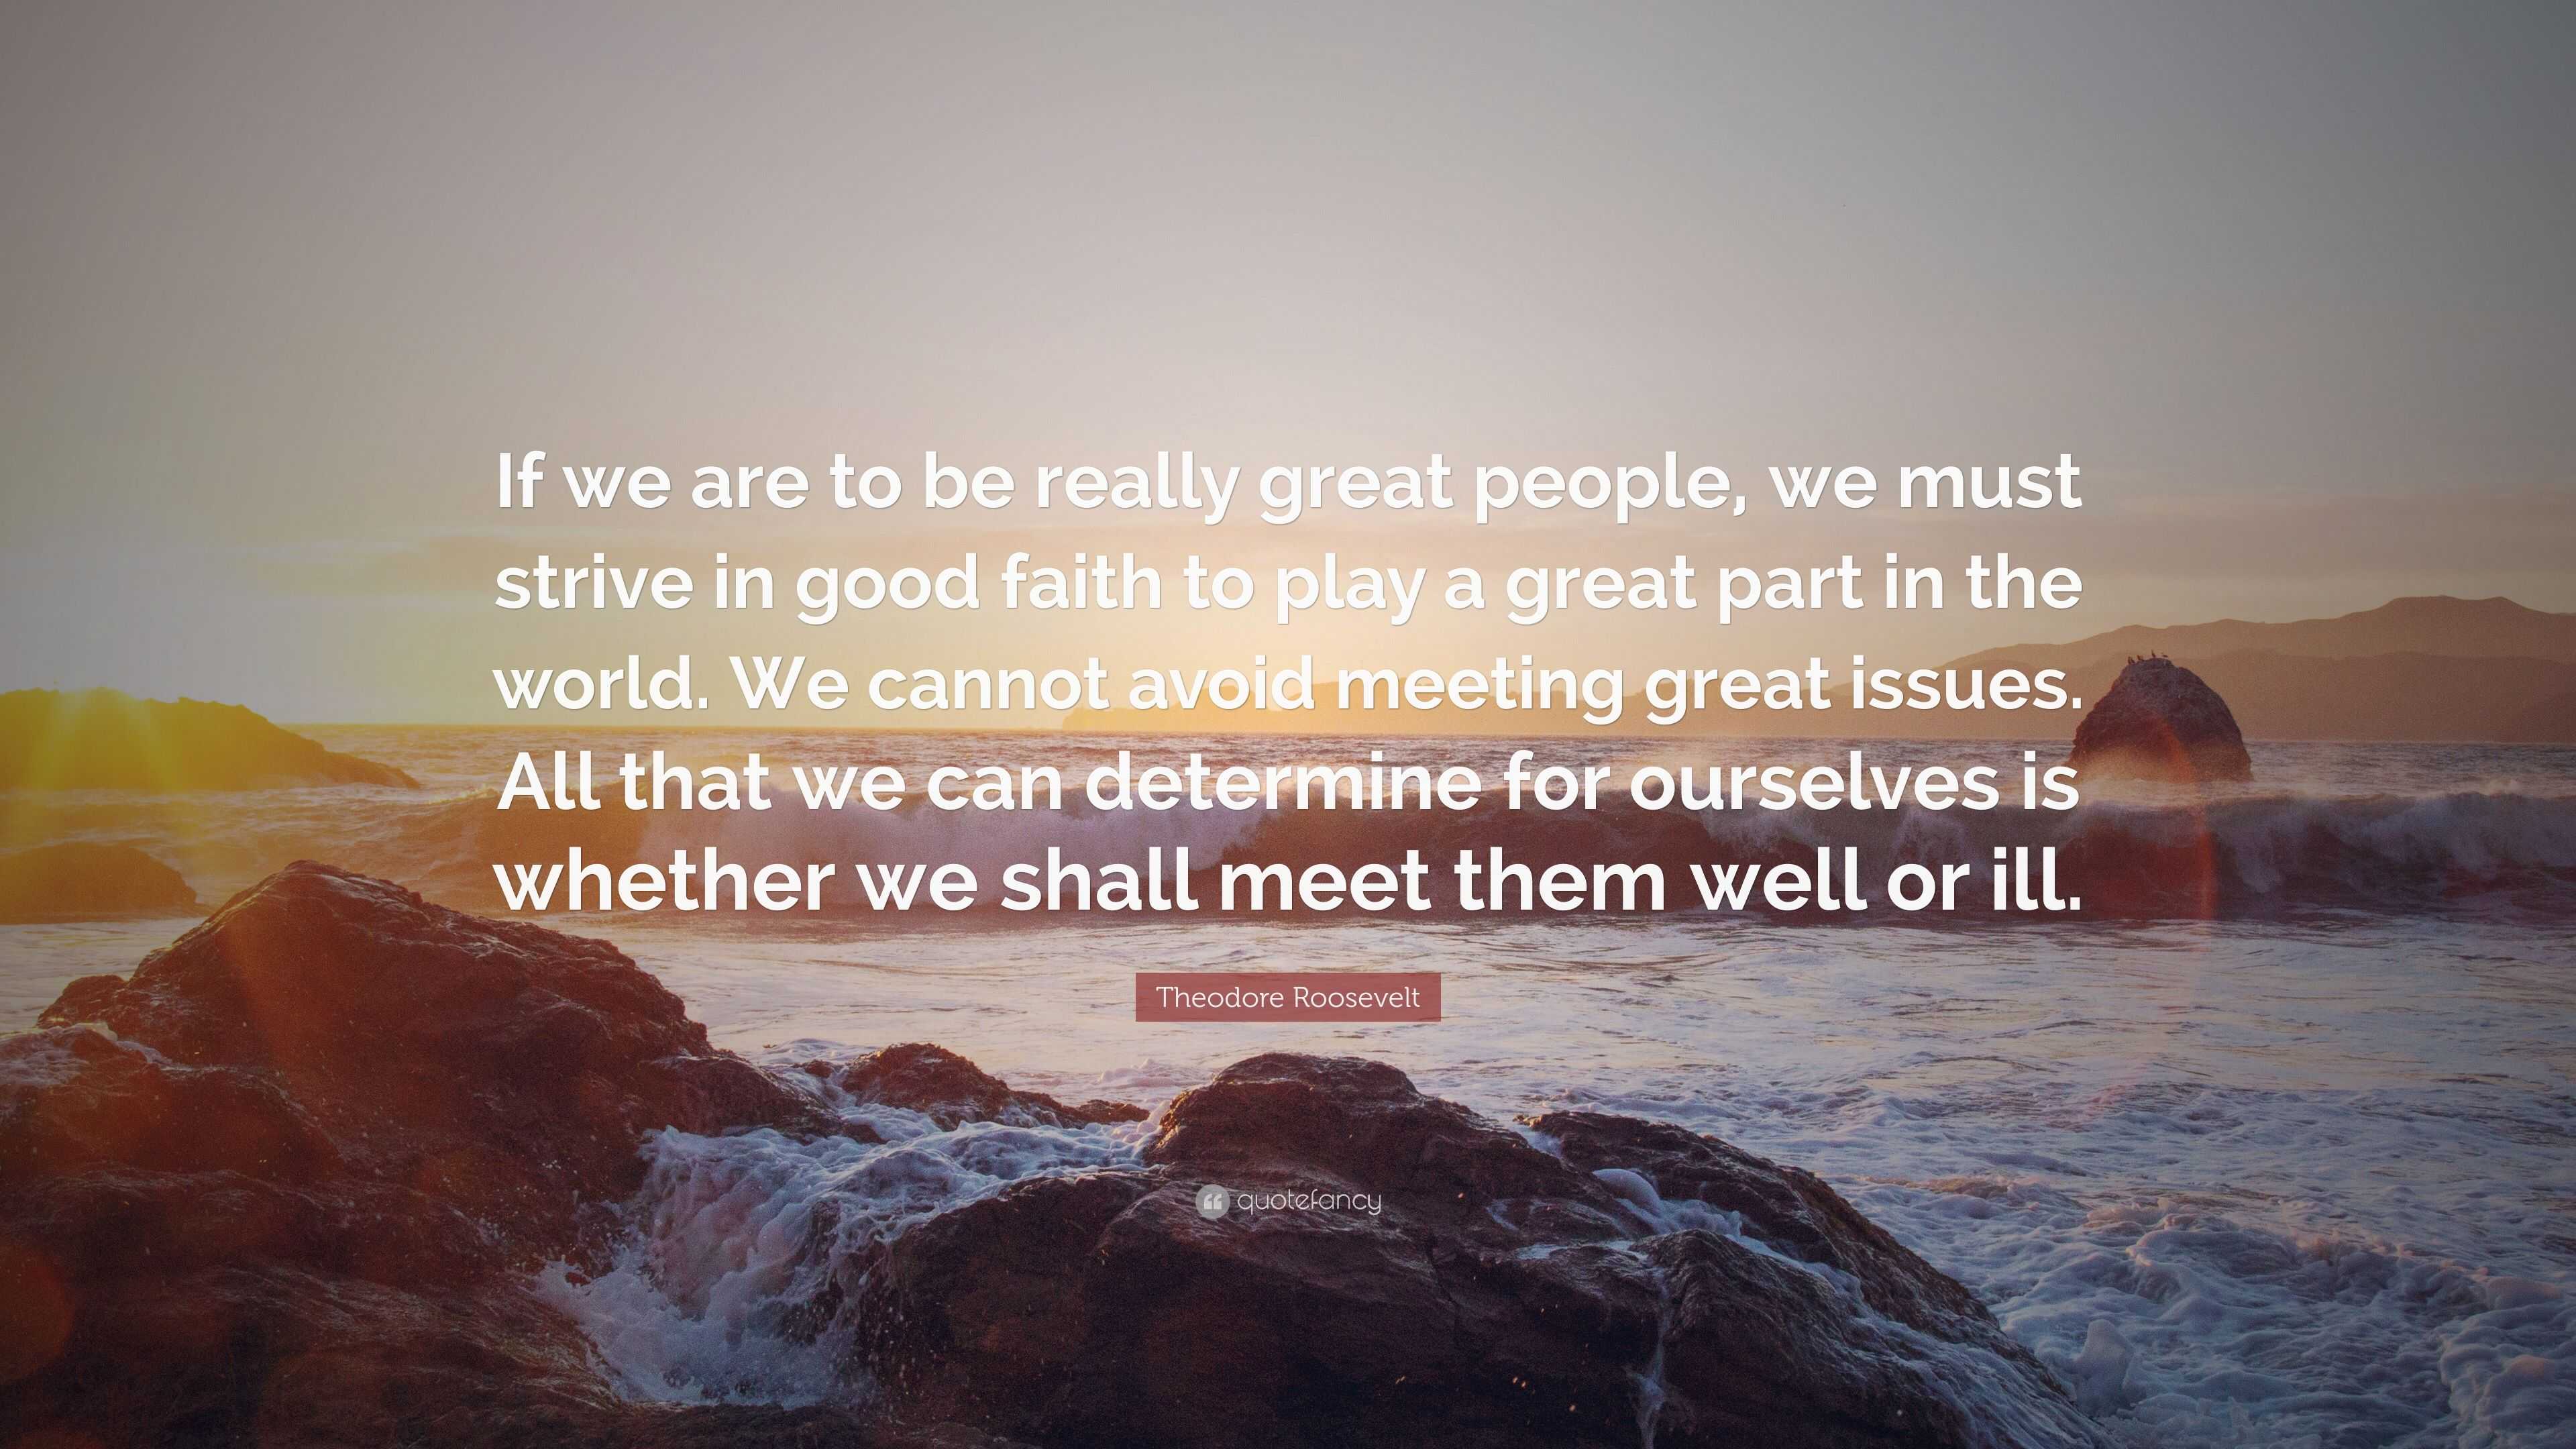 Theodore Roosevelt Quote: “If we are to be really great people, we must ...